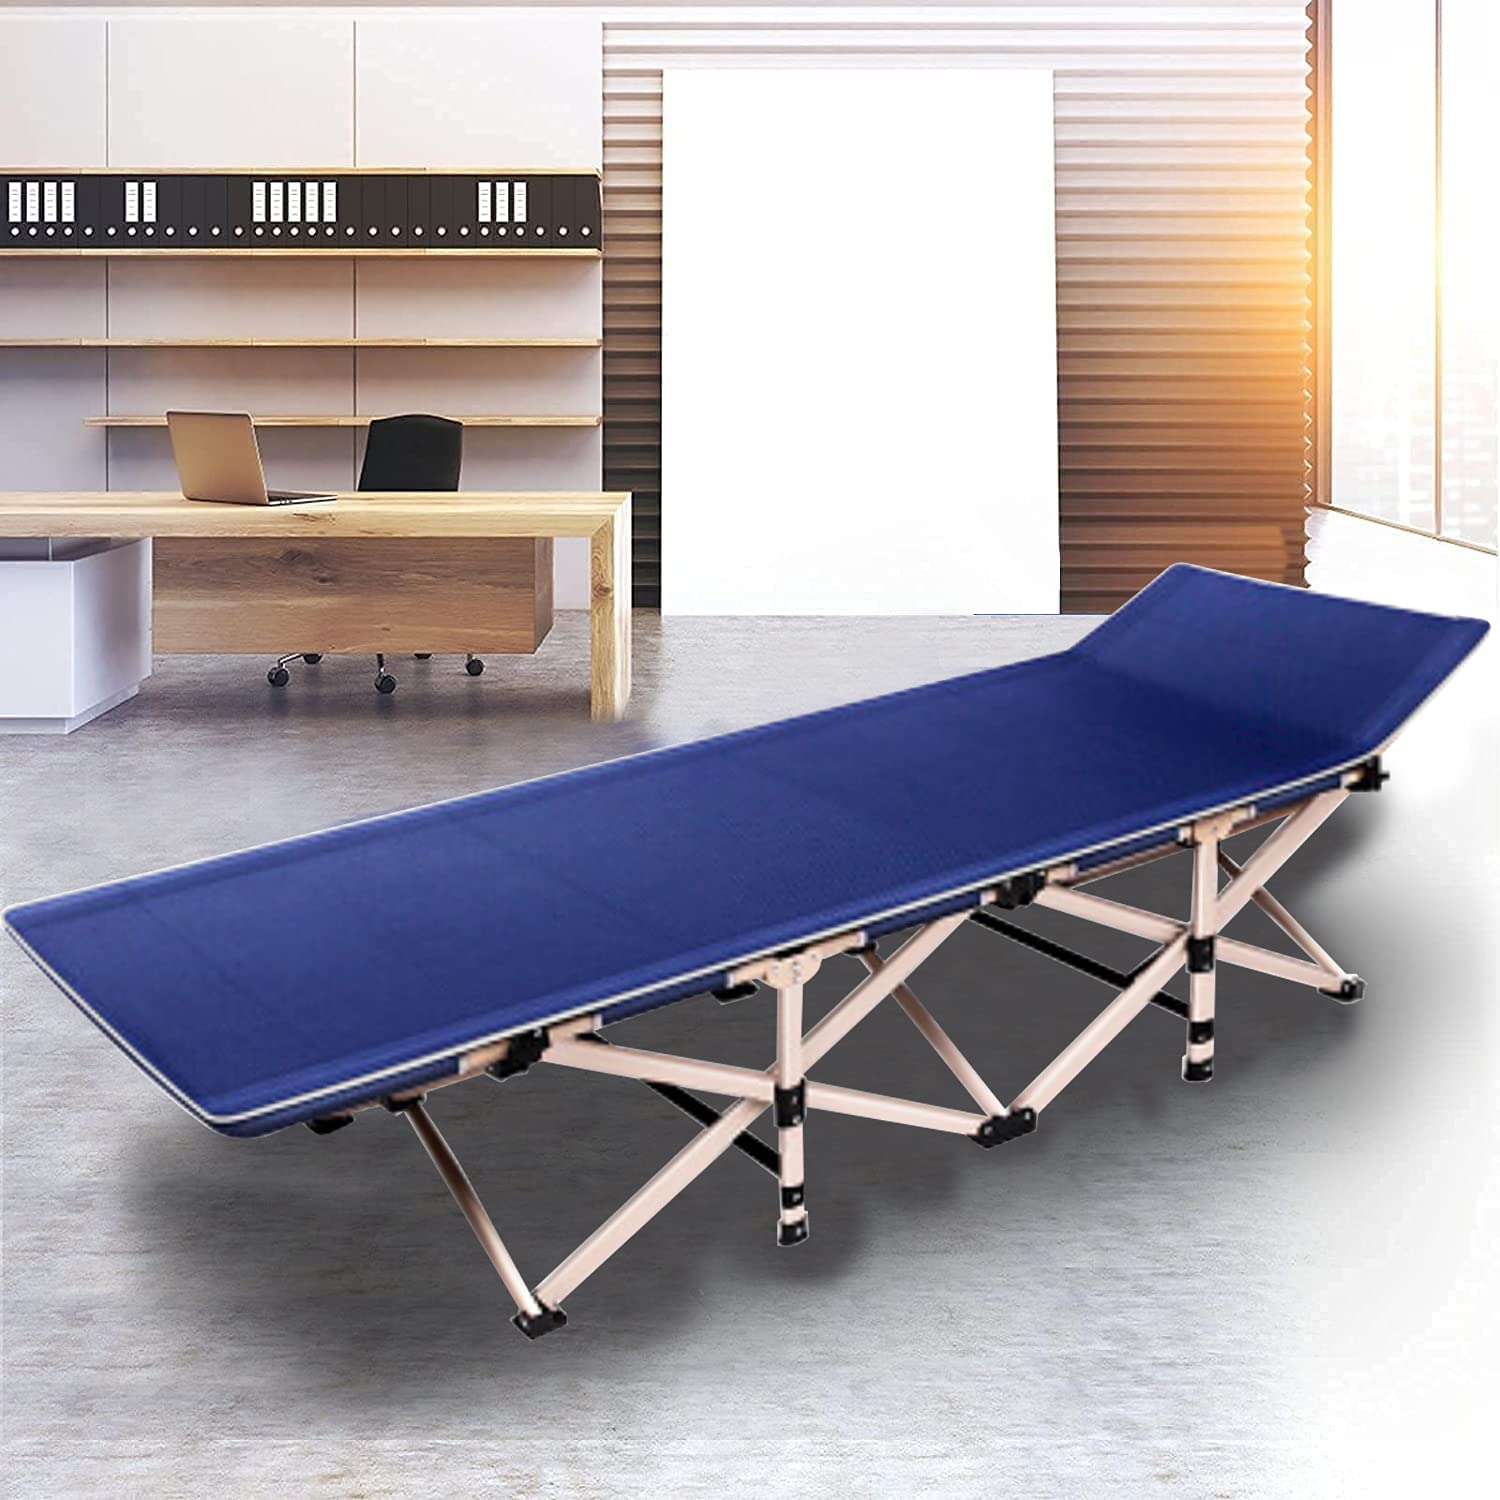 Folding bed for outdoor camping & picnic